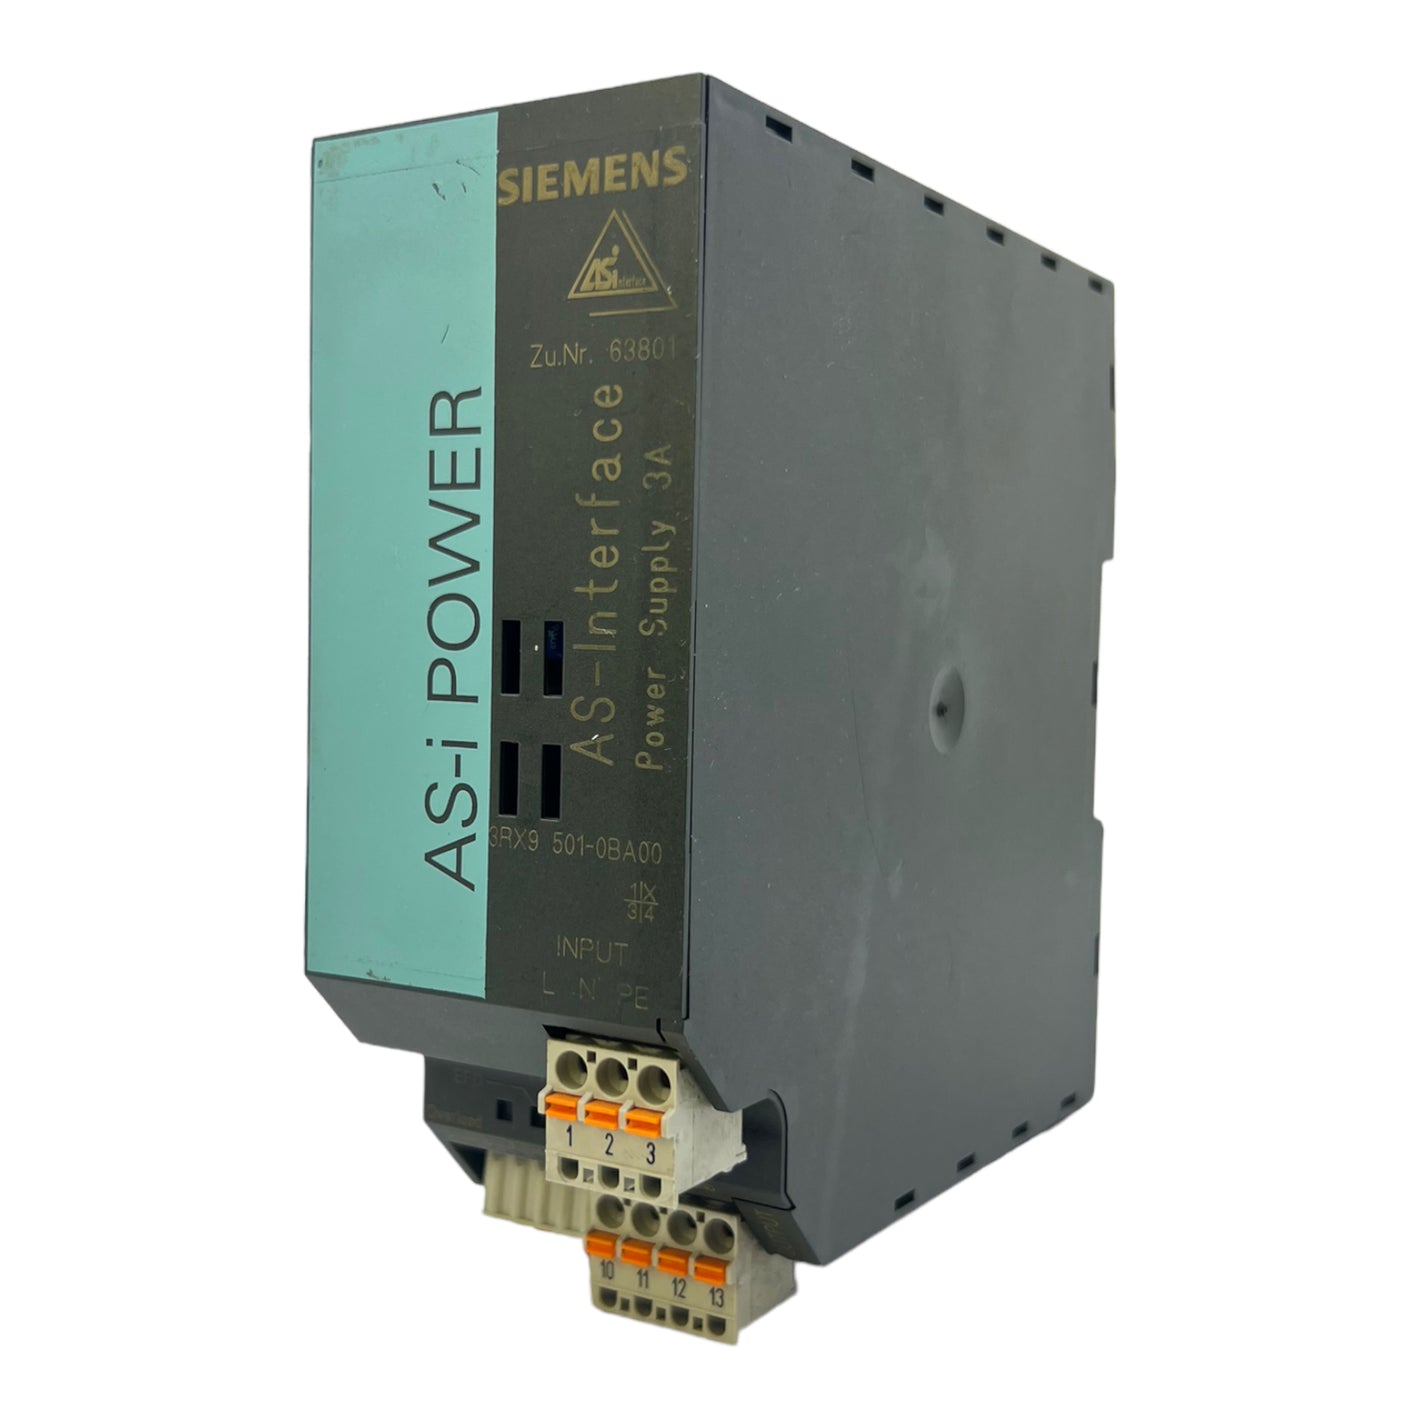 Siemens 3RX9501-0BA00 Power Supply In:120/230VAC 1.6/0.9A 50-60Hz Out:30VDC 3A 